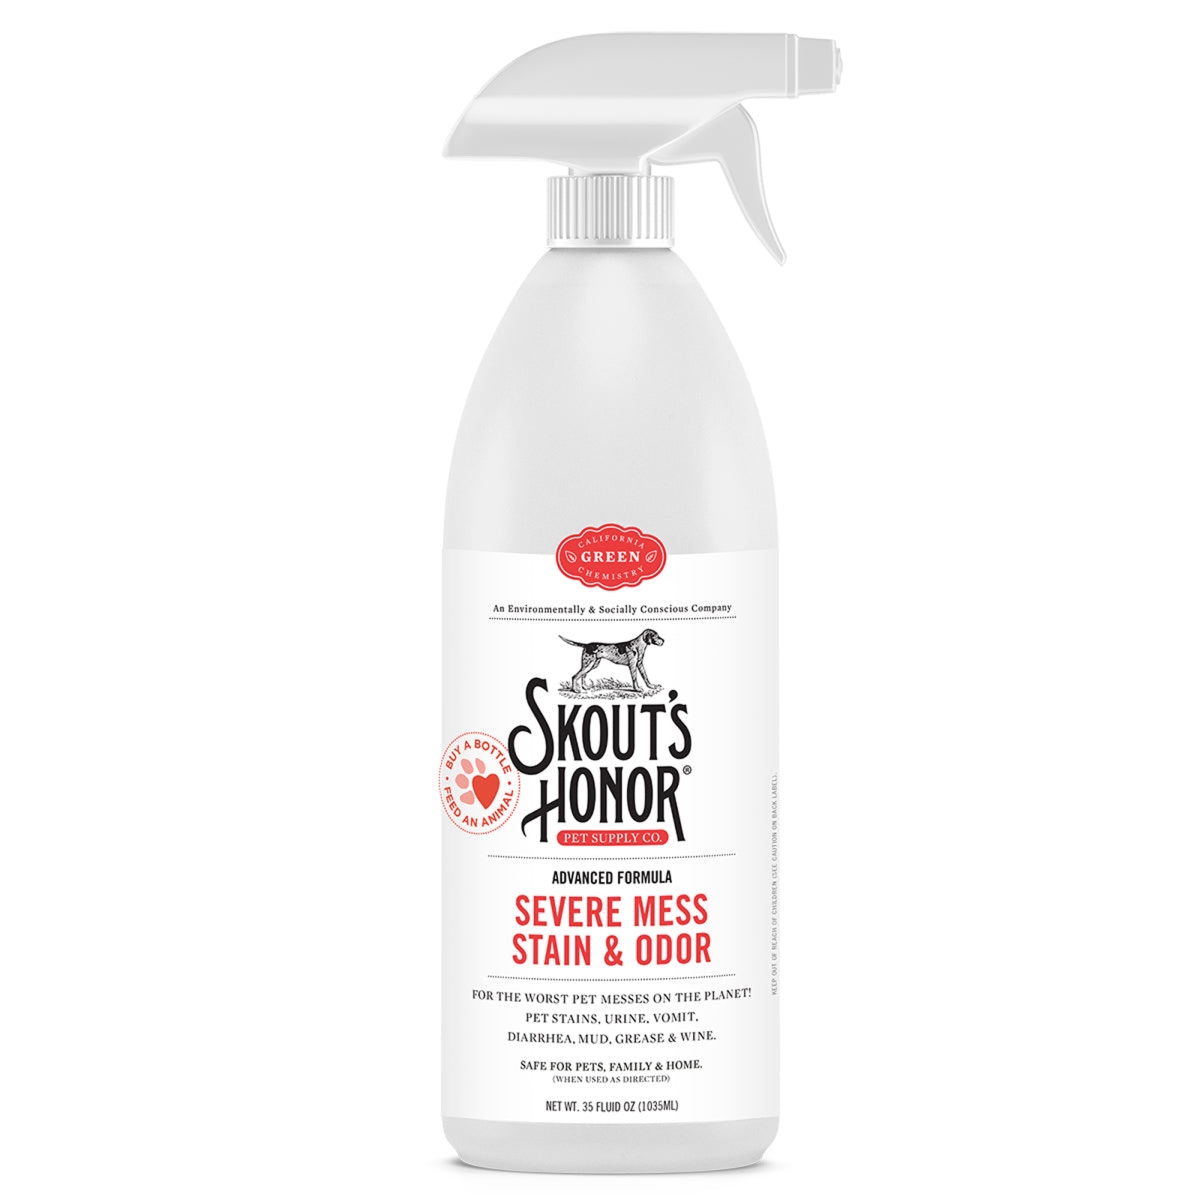 Picture of Skouts Honor 810053870747 Dog Stain & Odor Severe Mess Formula Advance Spray